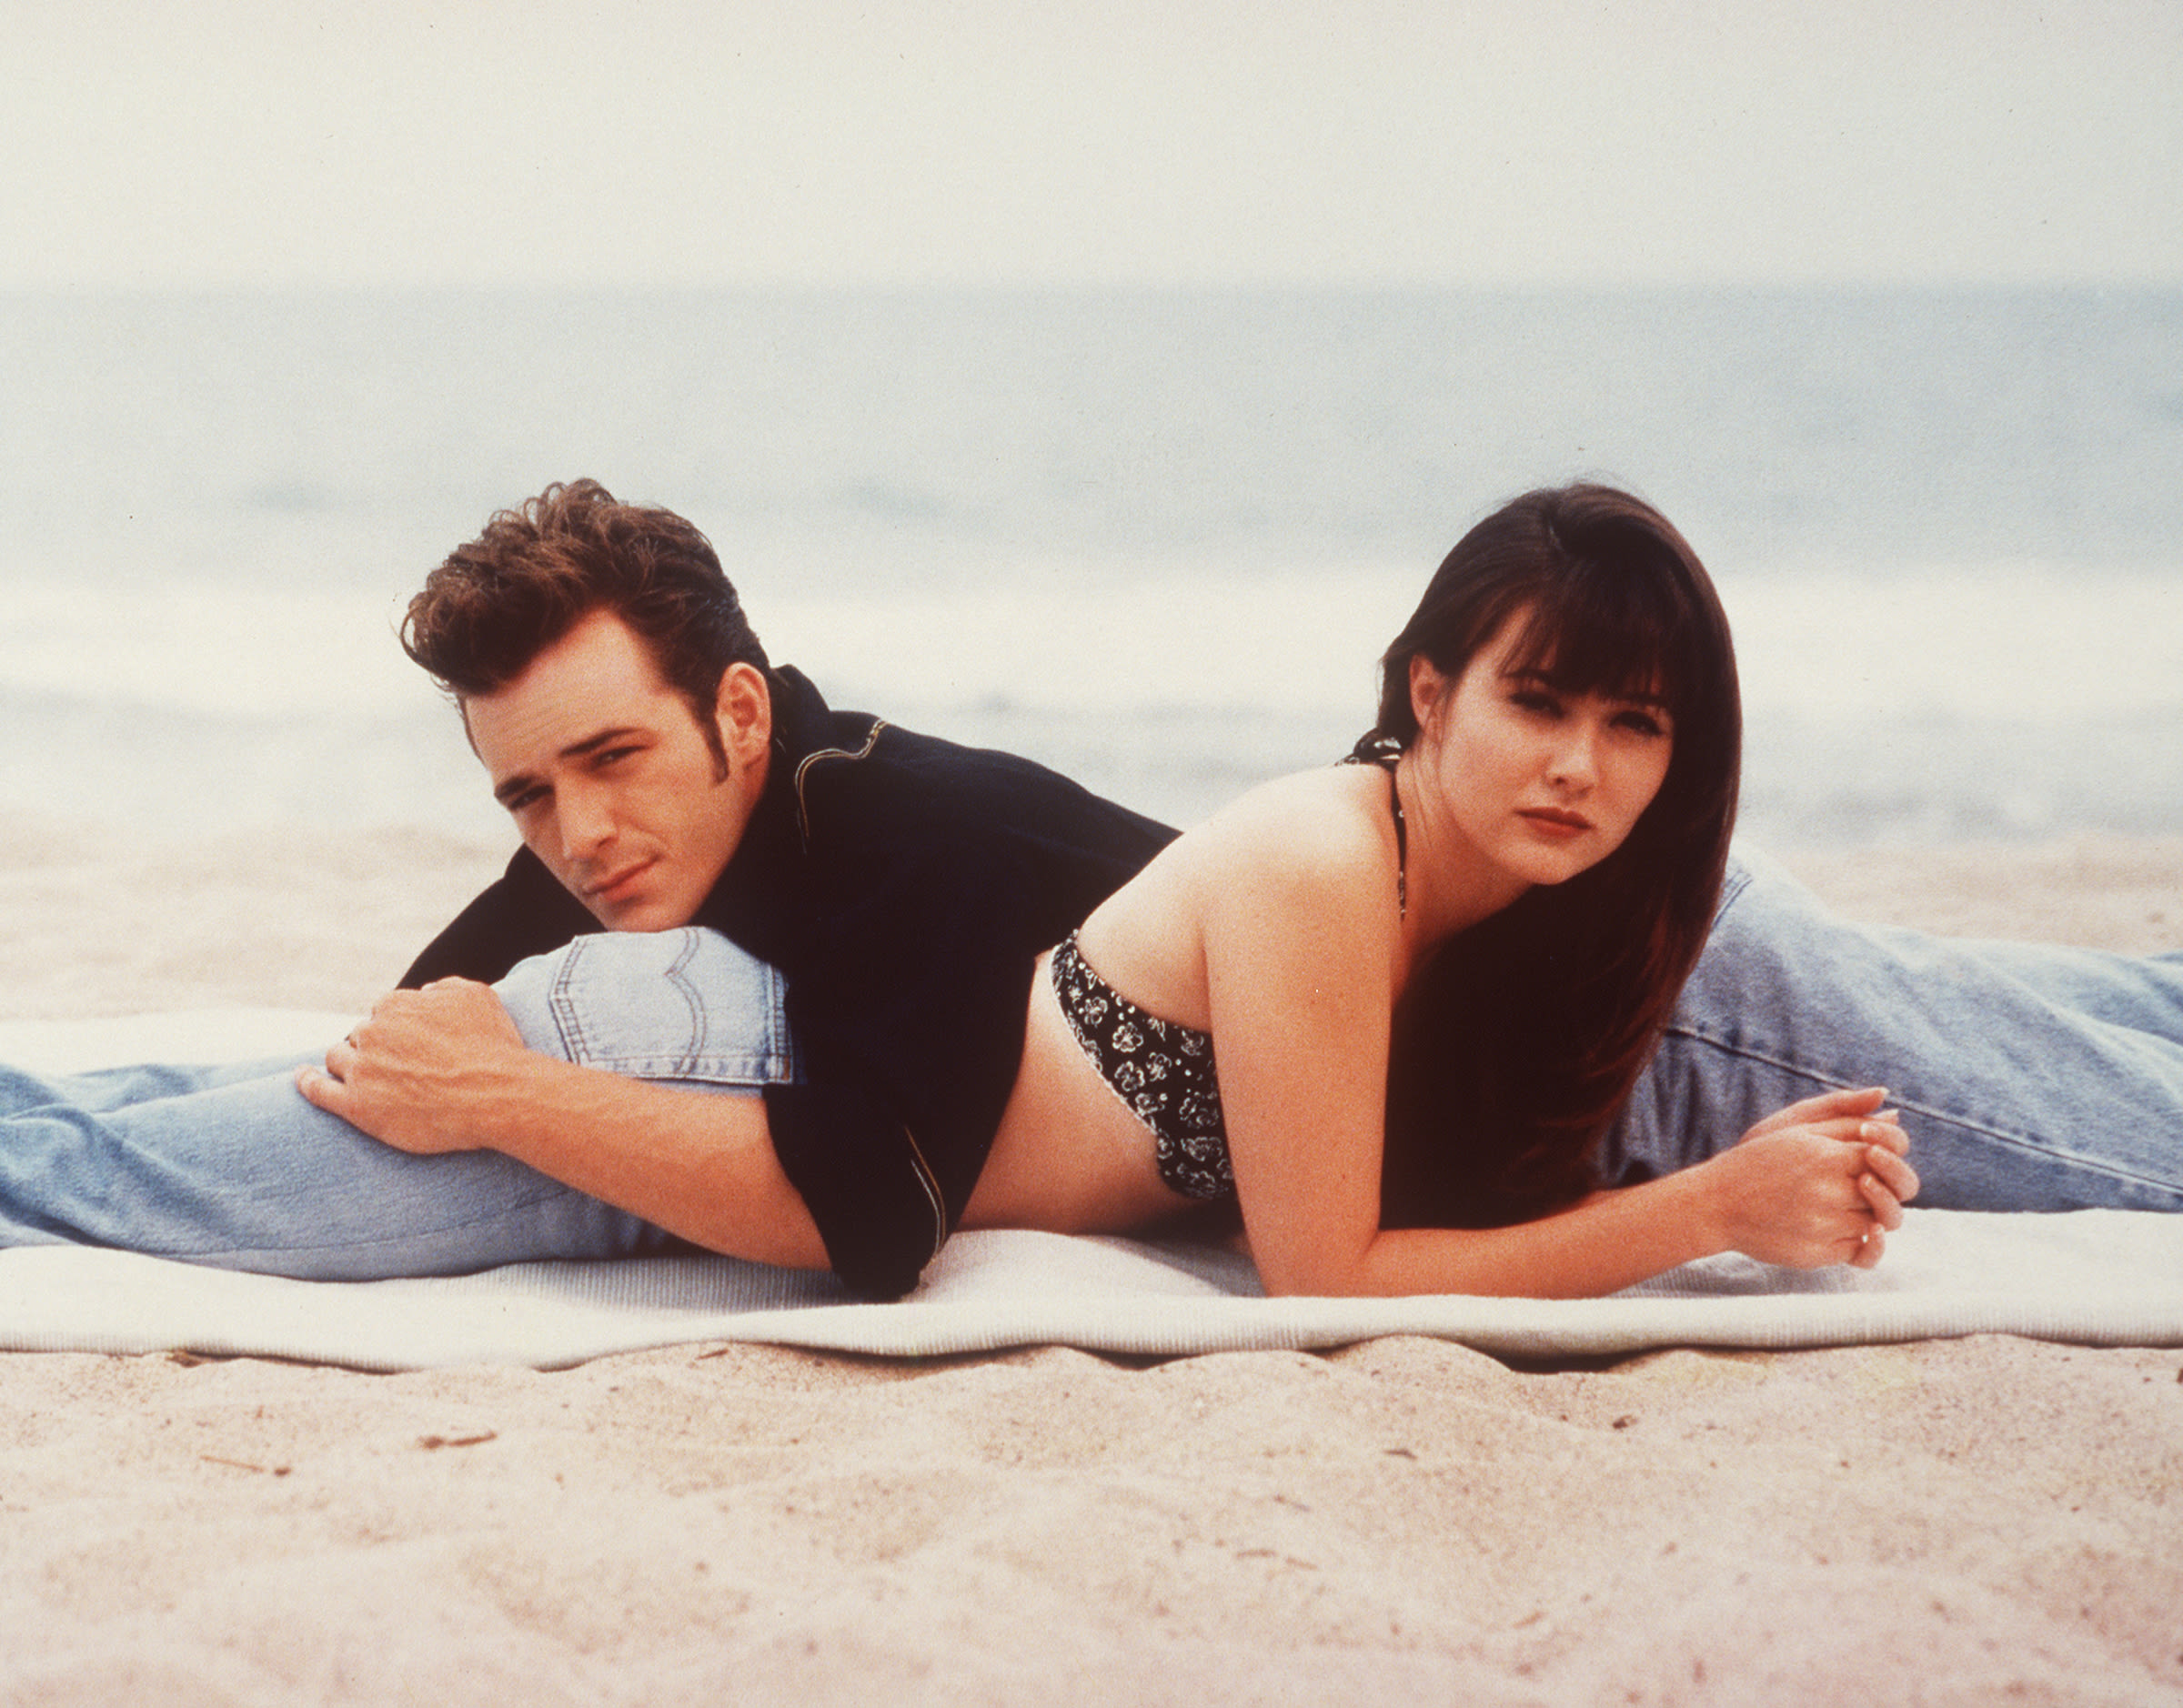 As Brenda in '90210,' Shannen Doherty played a complex adolescent not unlike herself